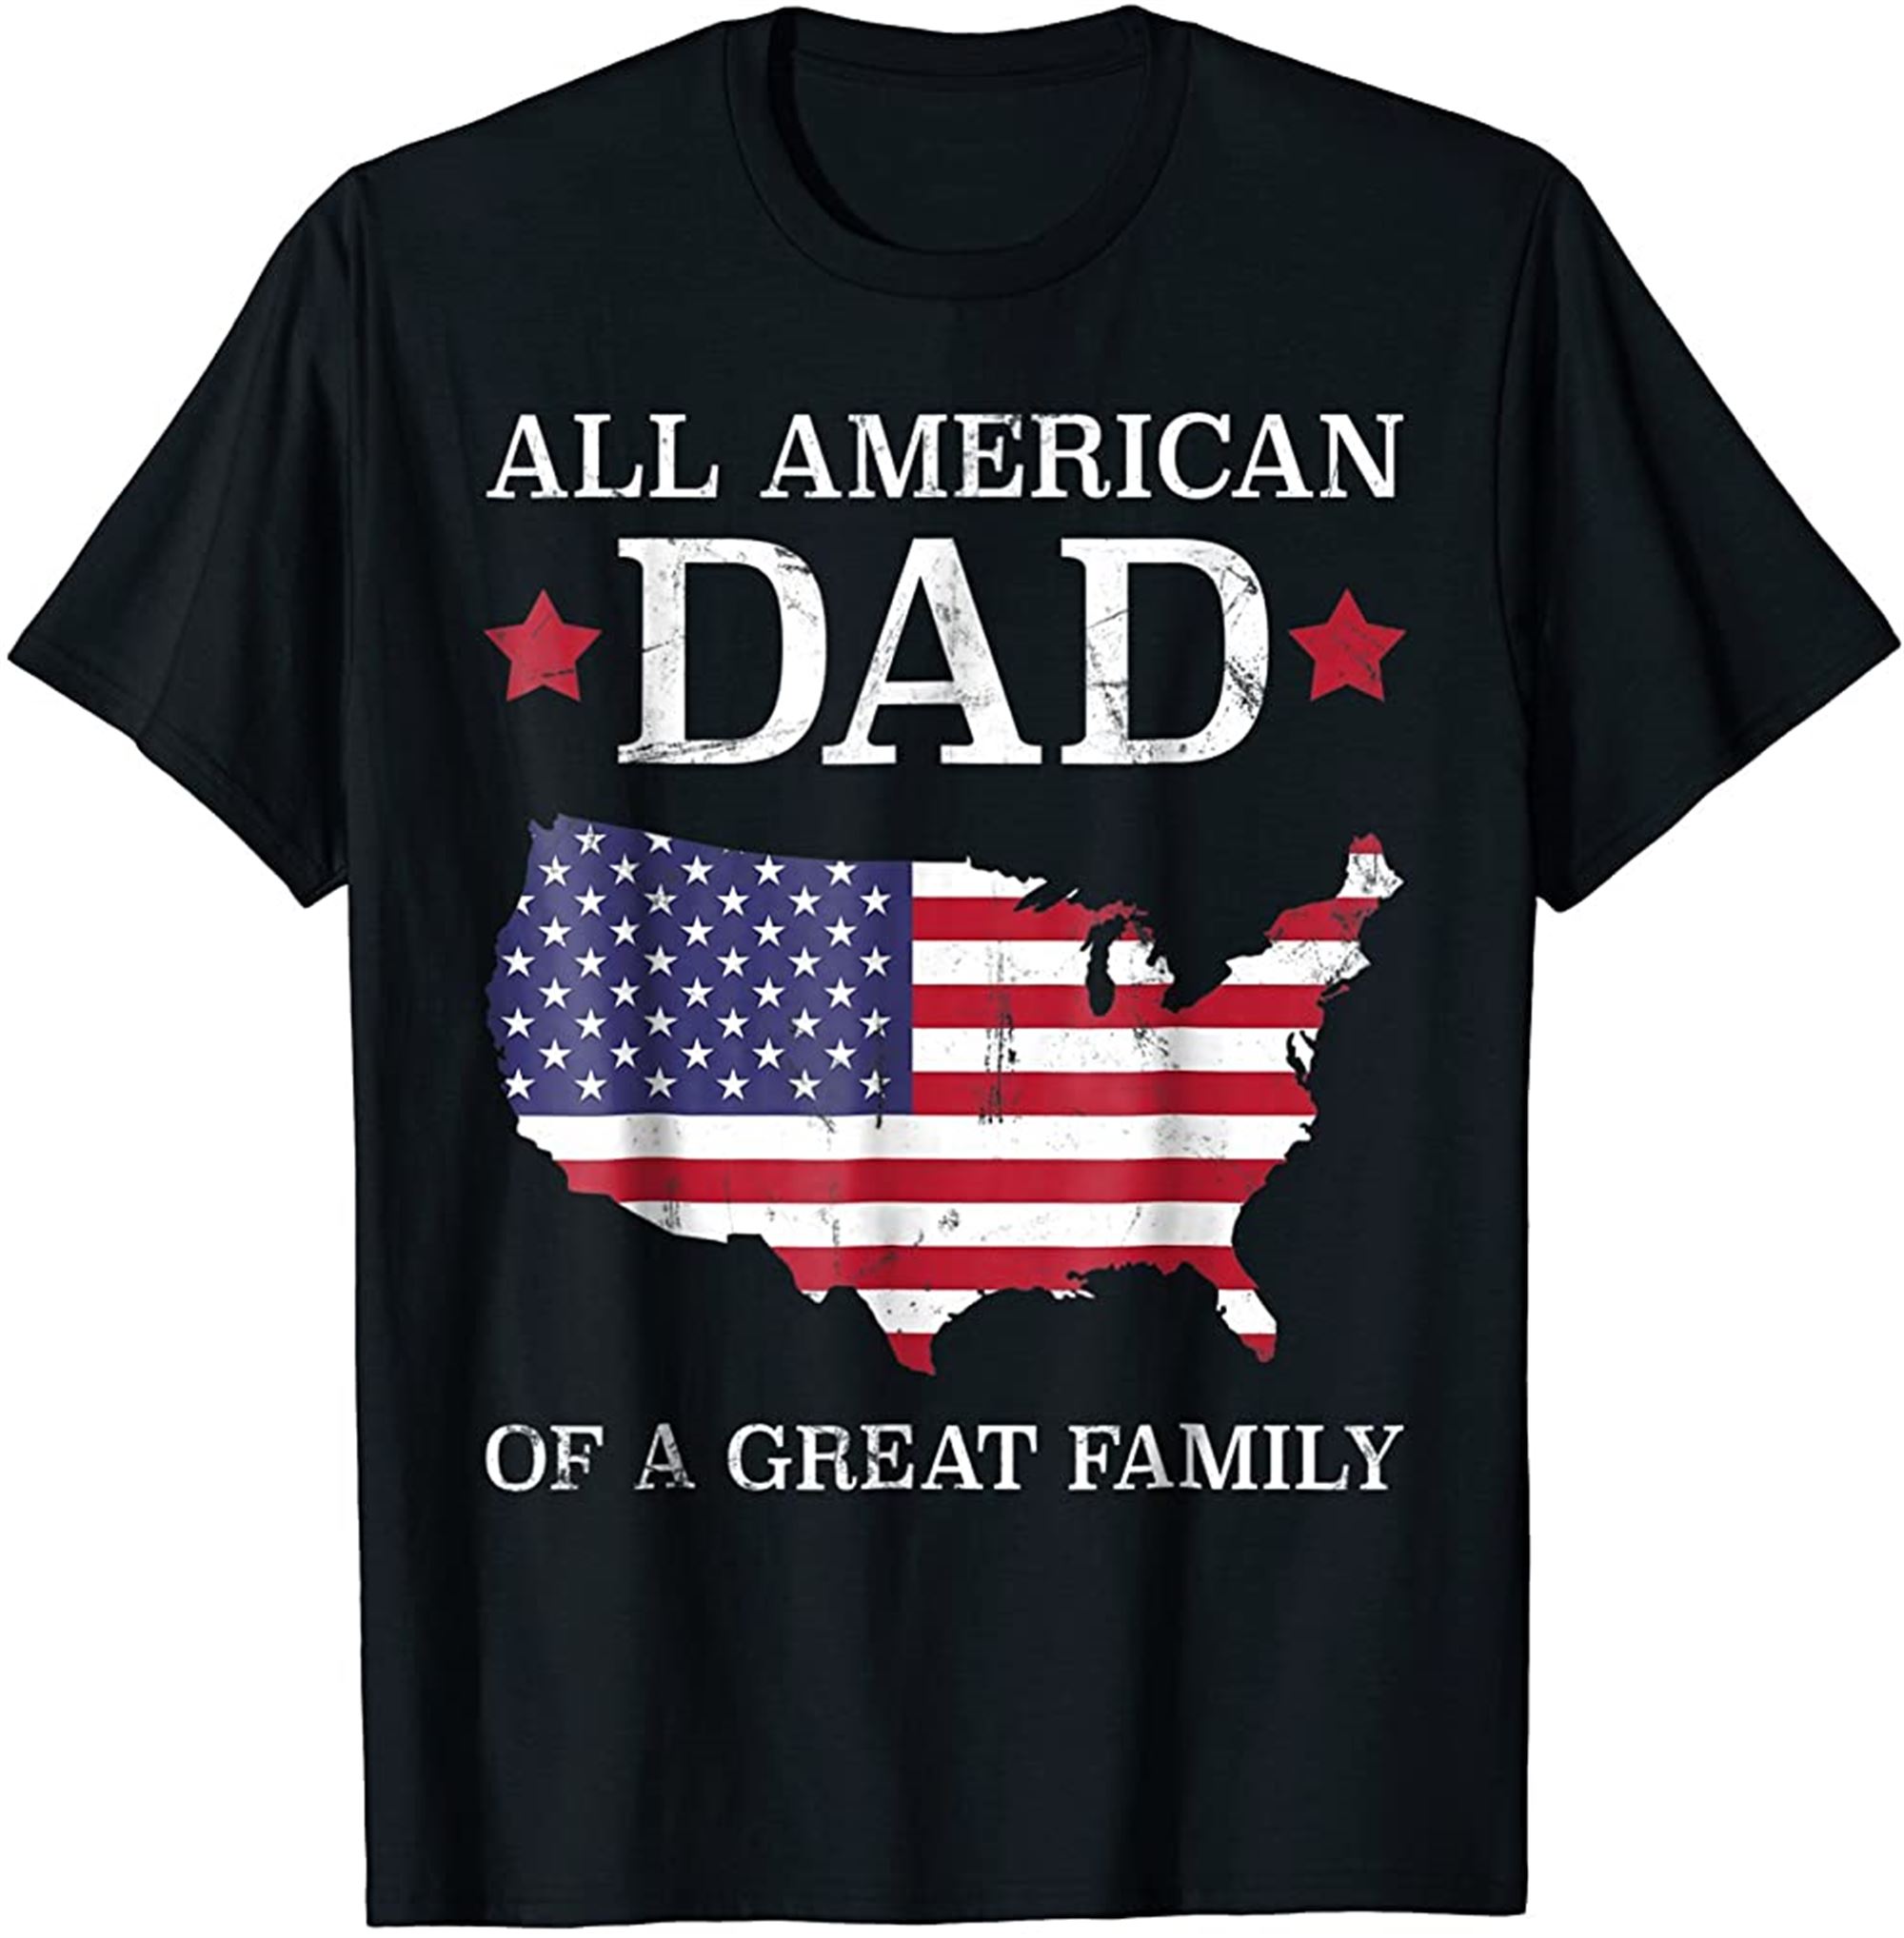 Mens All American Dad Family 4th Of July Matching Shirts Full Size Up To 5xl